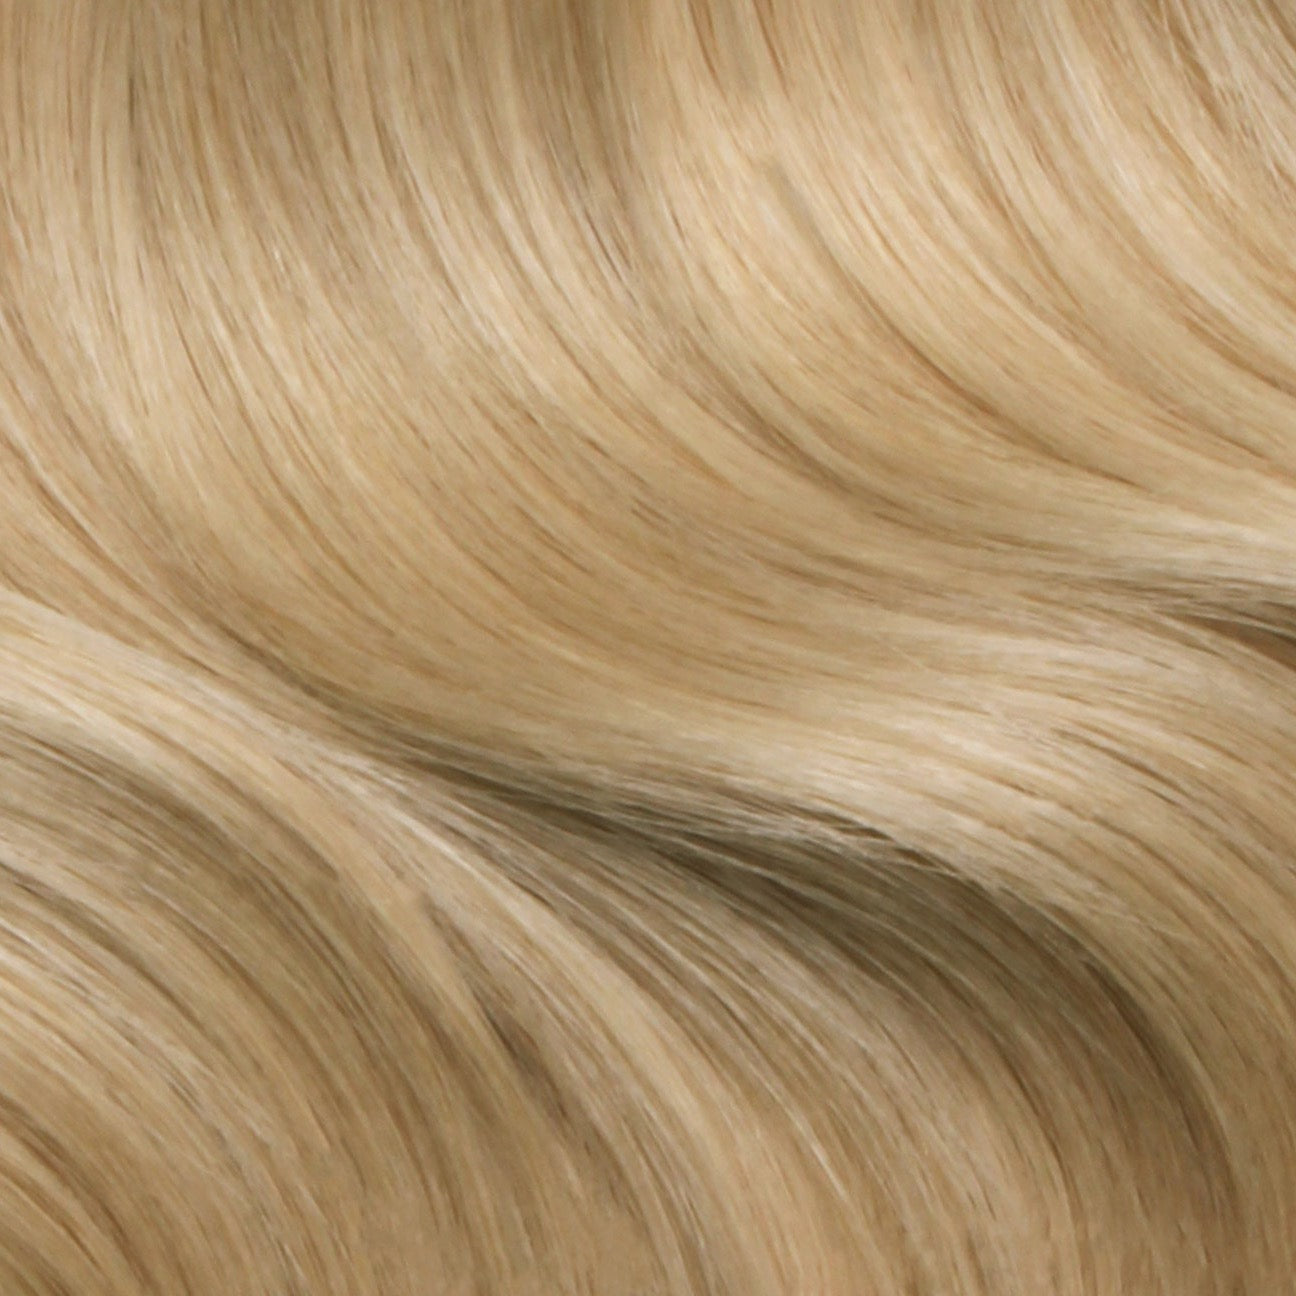 Nano Bonds 18 Inches - SWAY Hair Extensions Beach-Ash-Blonde-9-613 Ultra-fine, invisible bonds for a flawless, natural look. 100% Remy Human hair, lightweight and versatile. Reusable and perfect for individual or salon use.